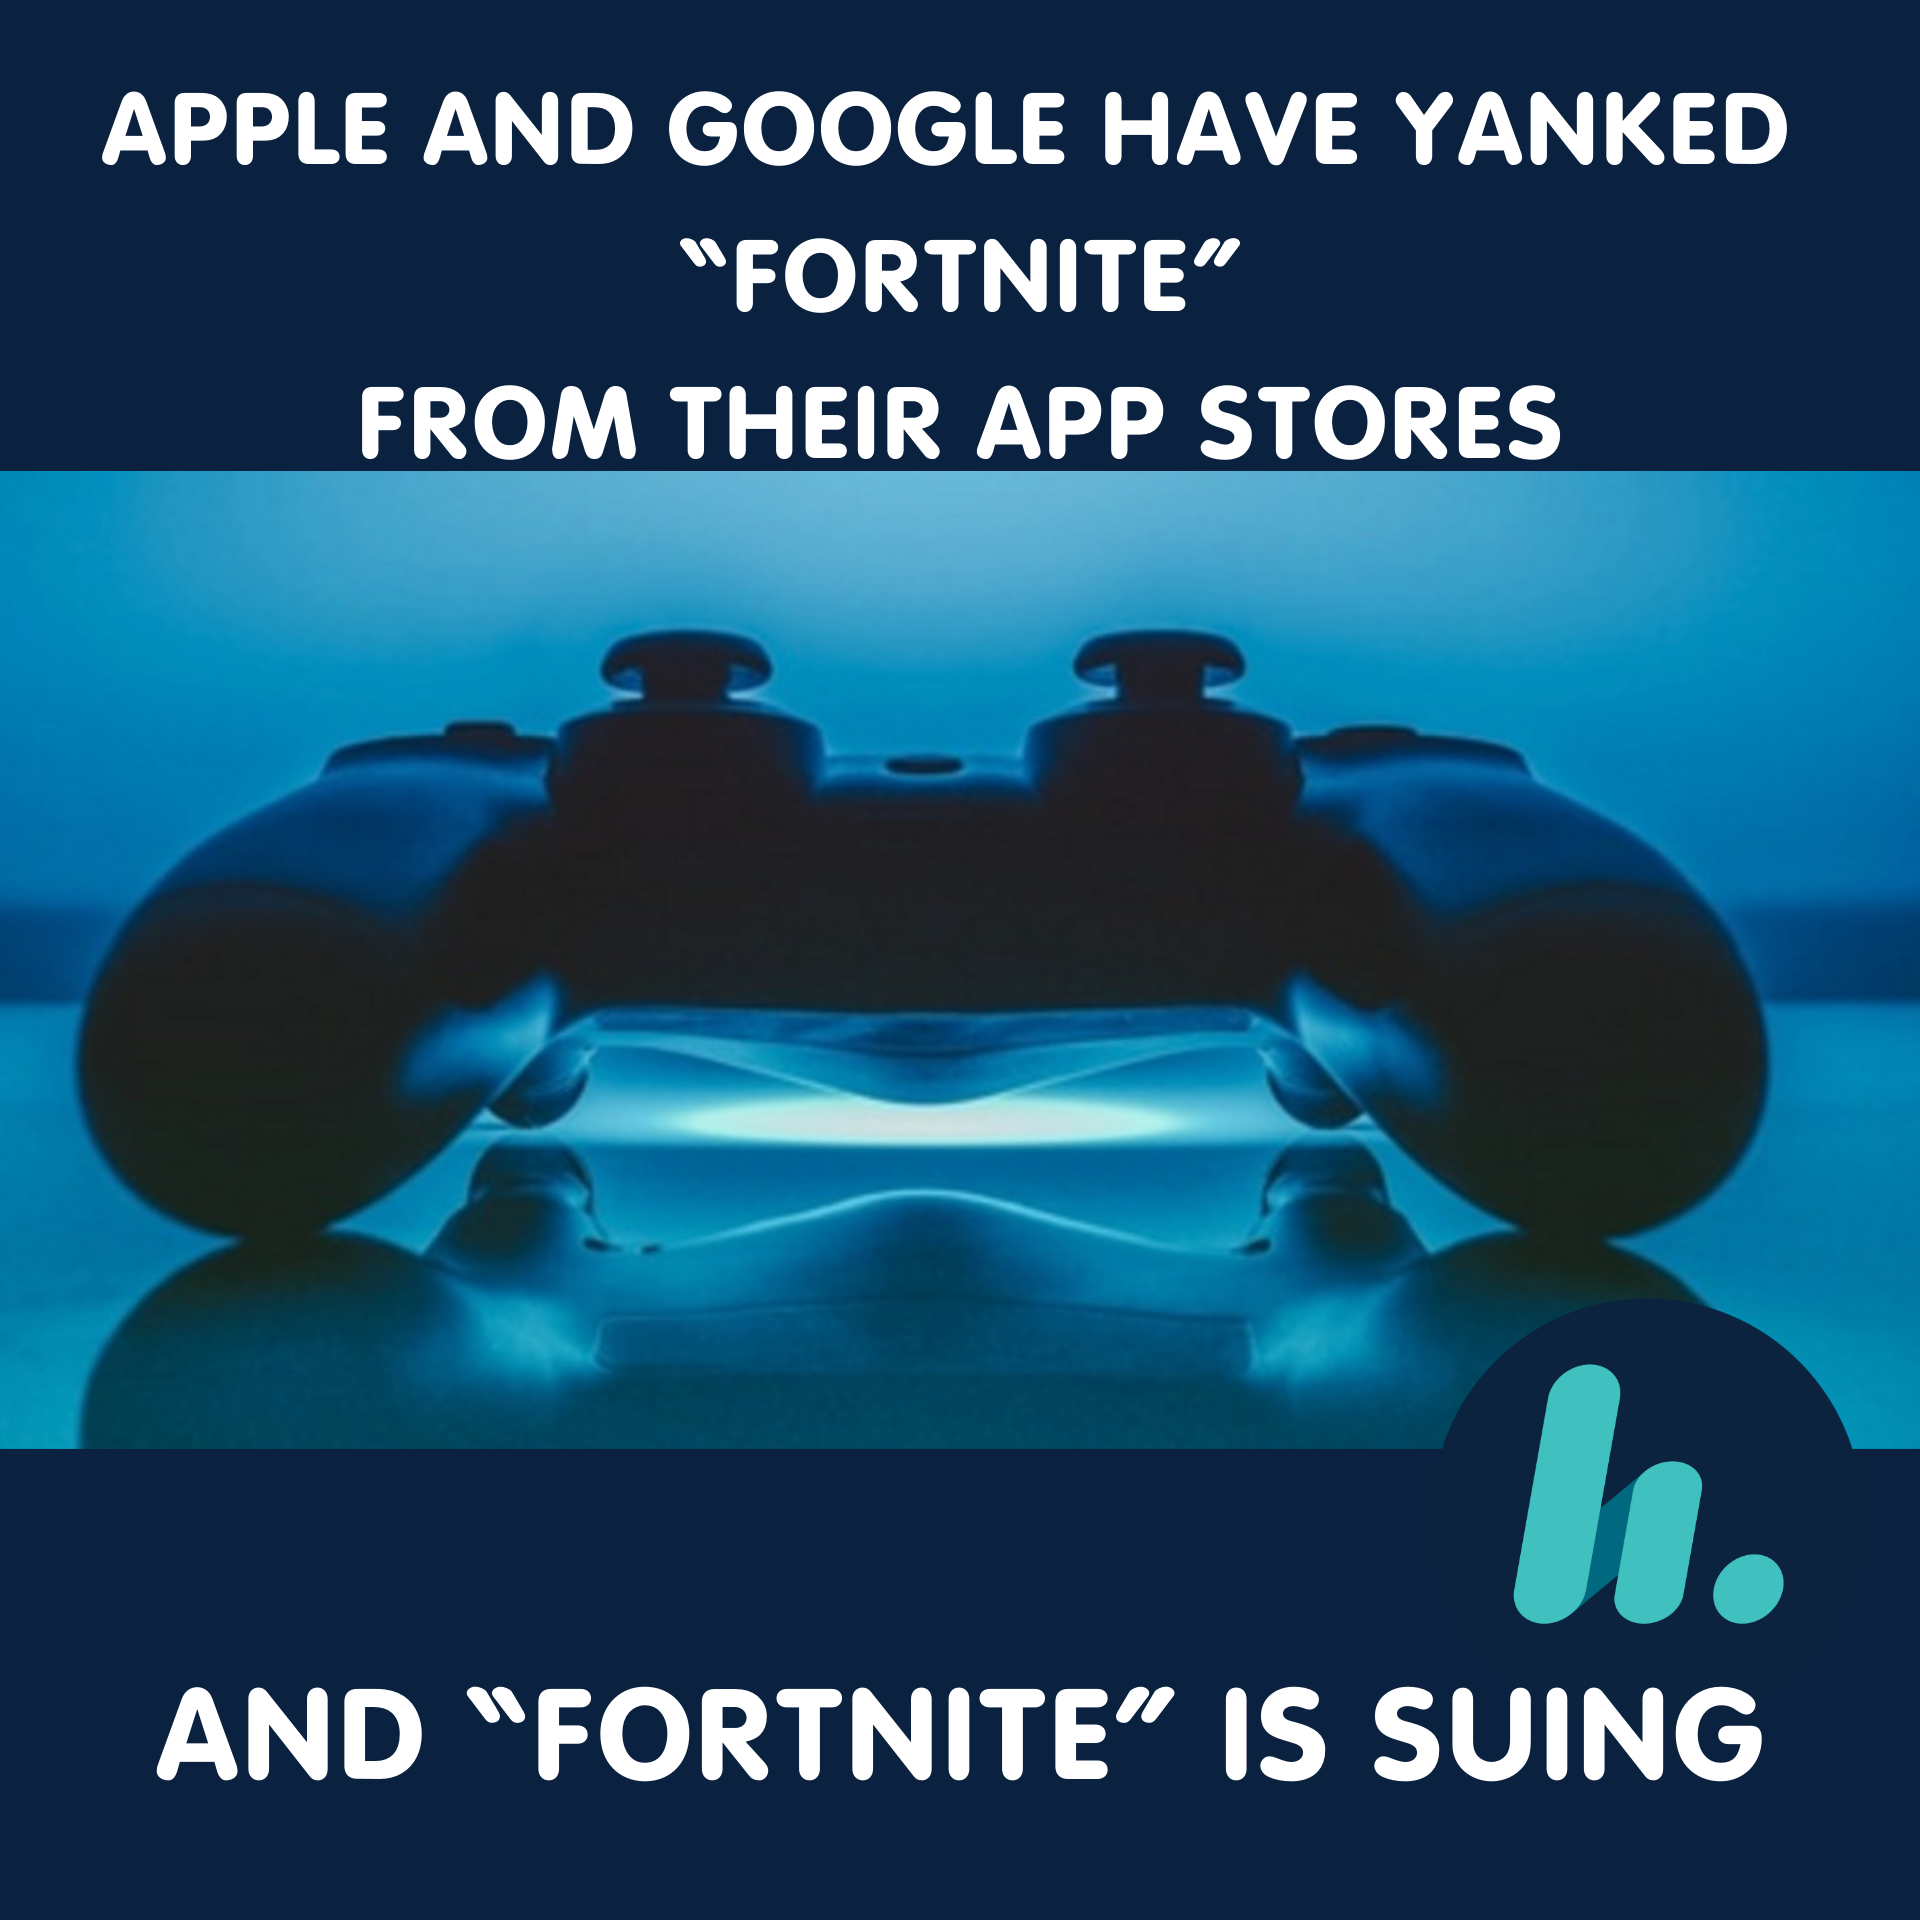 APPLE AND GOOGLE HAVE YANKED “FORTNITE” FROM THEIR APP STORES, AND “FORTNITE” IS SUING